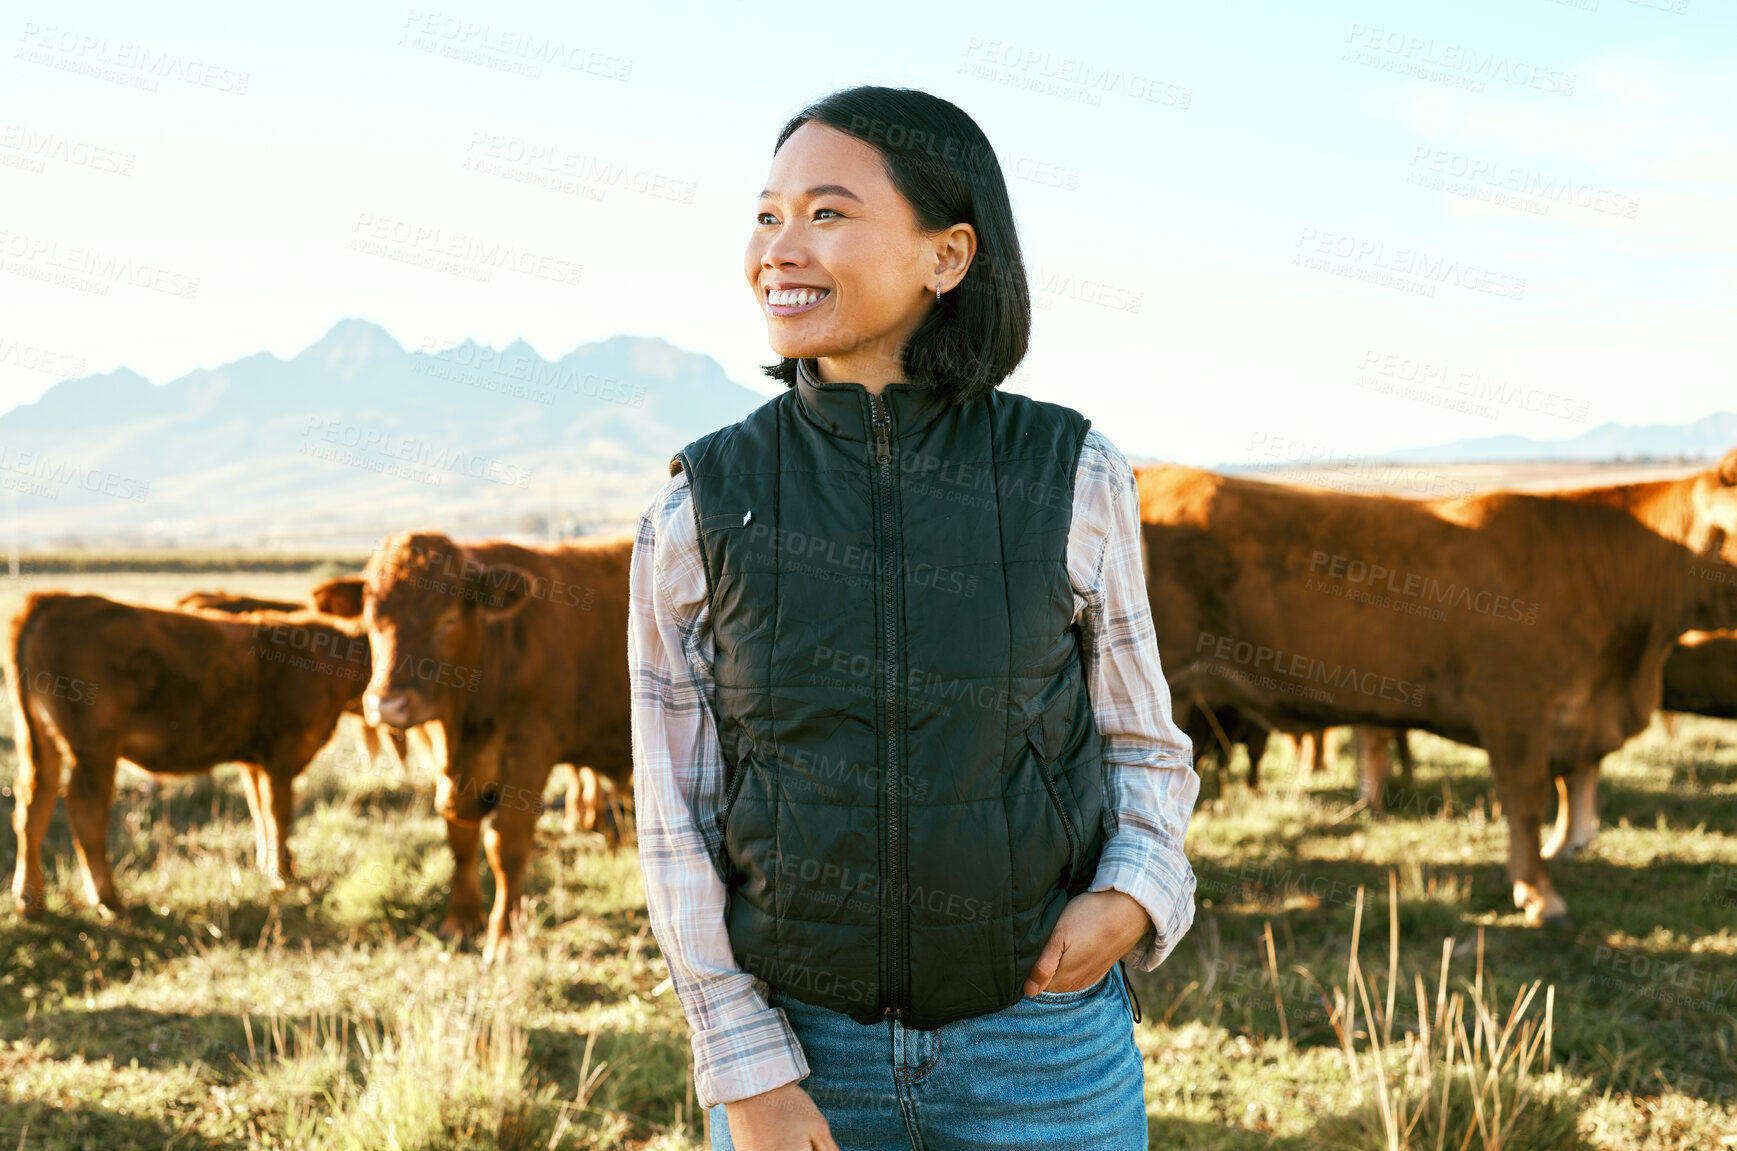 Buy stock photo Countryside, cow cattle and Asian woman happy about nature, mountains and agriculture farm. Smile, grass field and animals with a person from Japan on travel, holiday and vacation in Texas